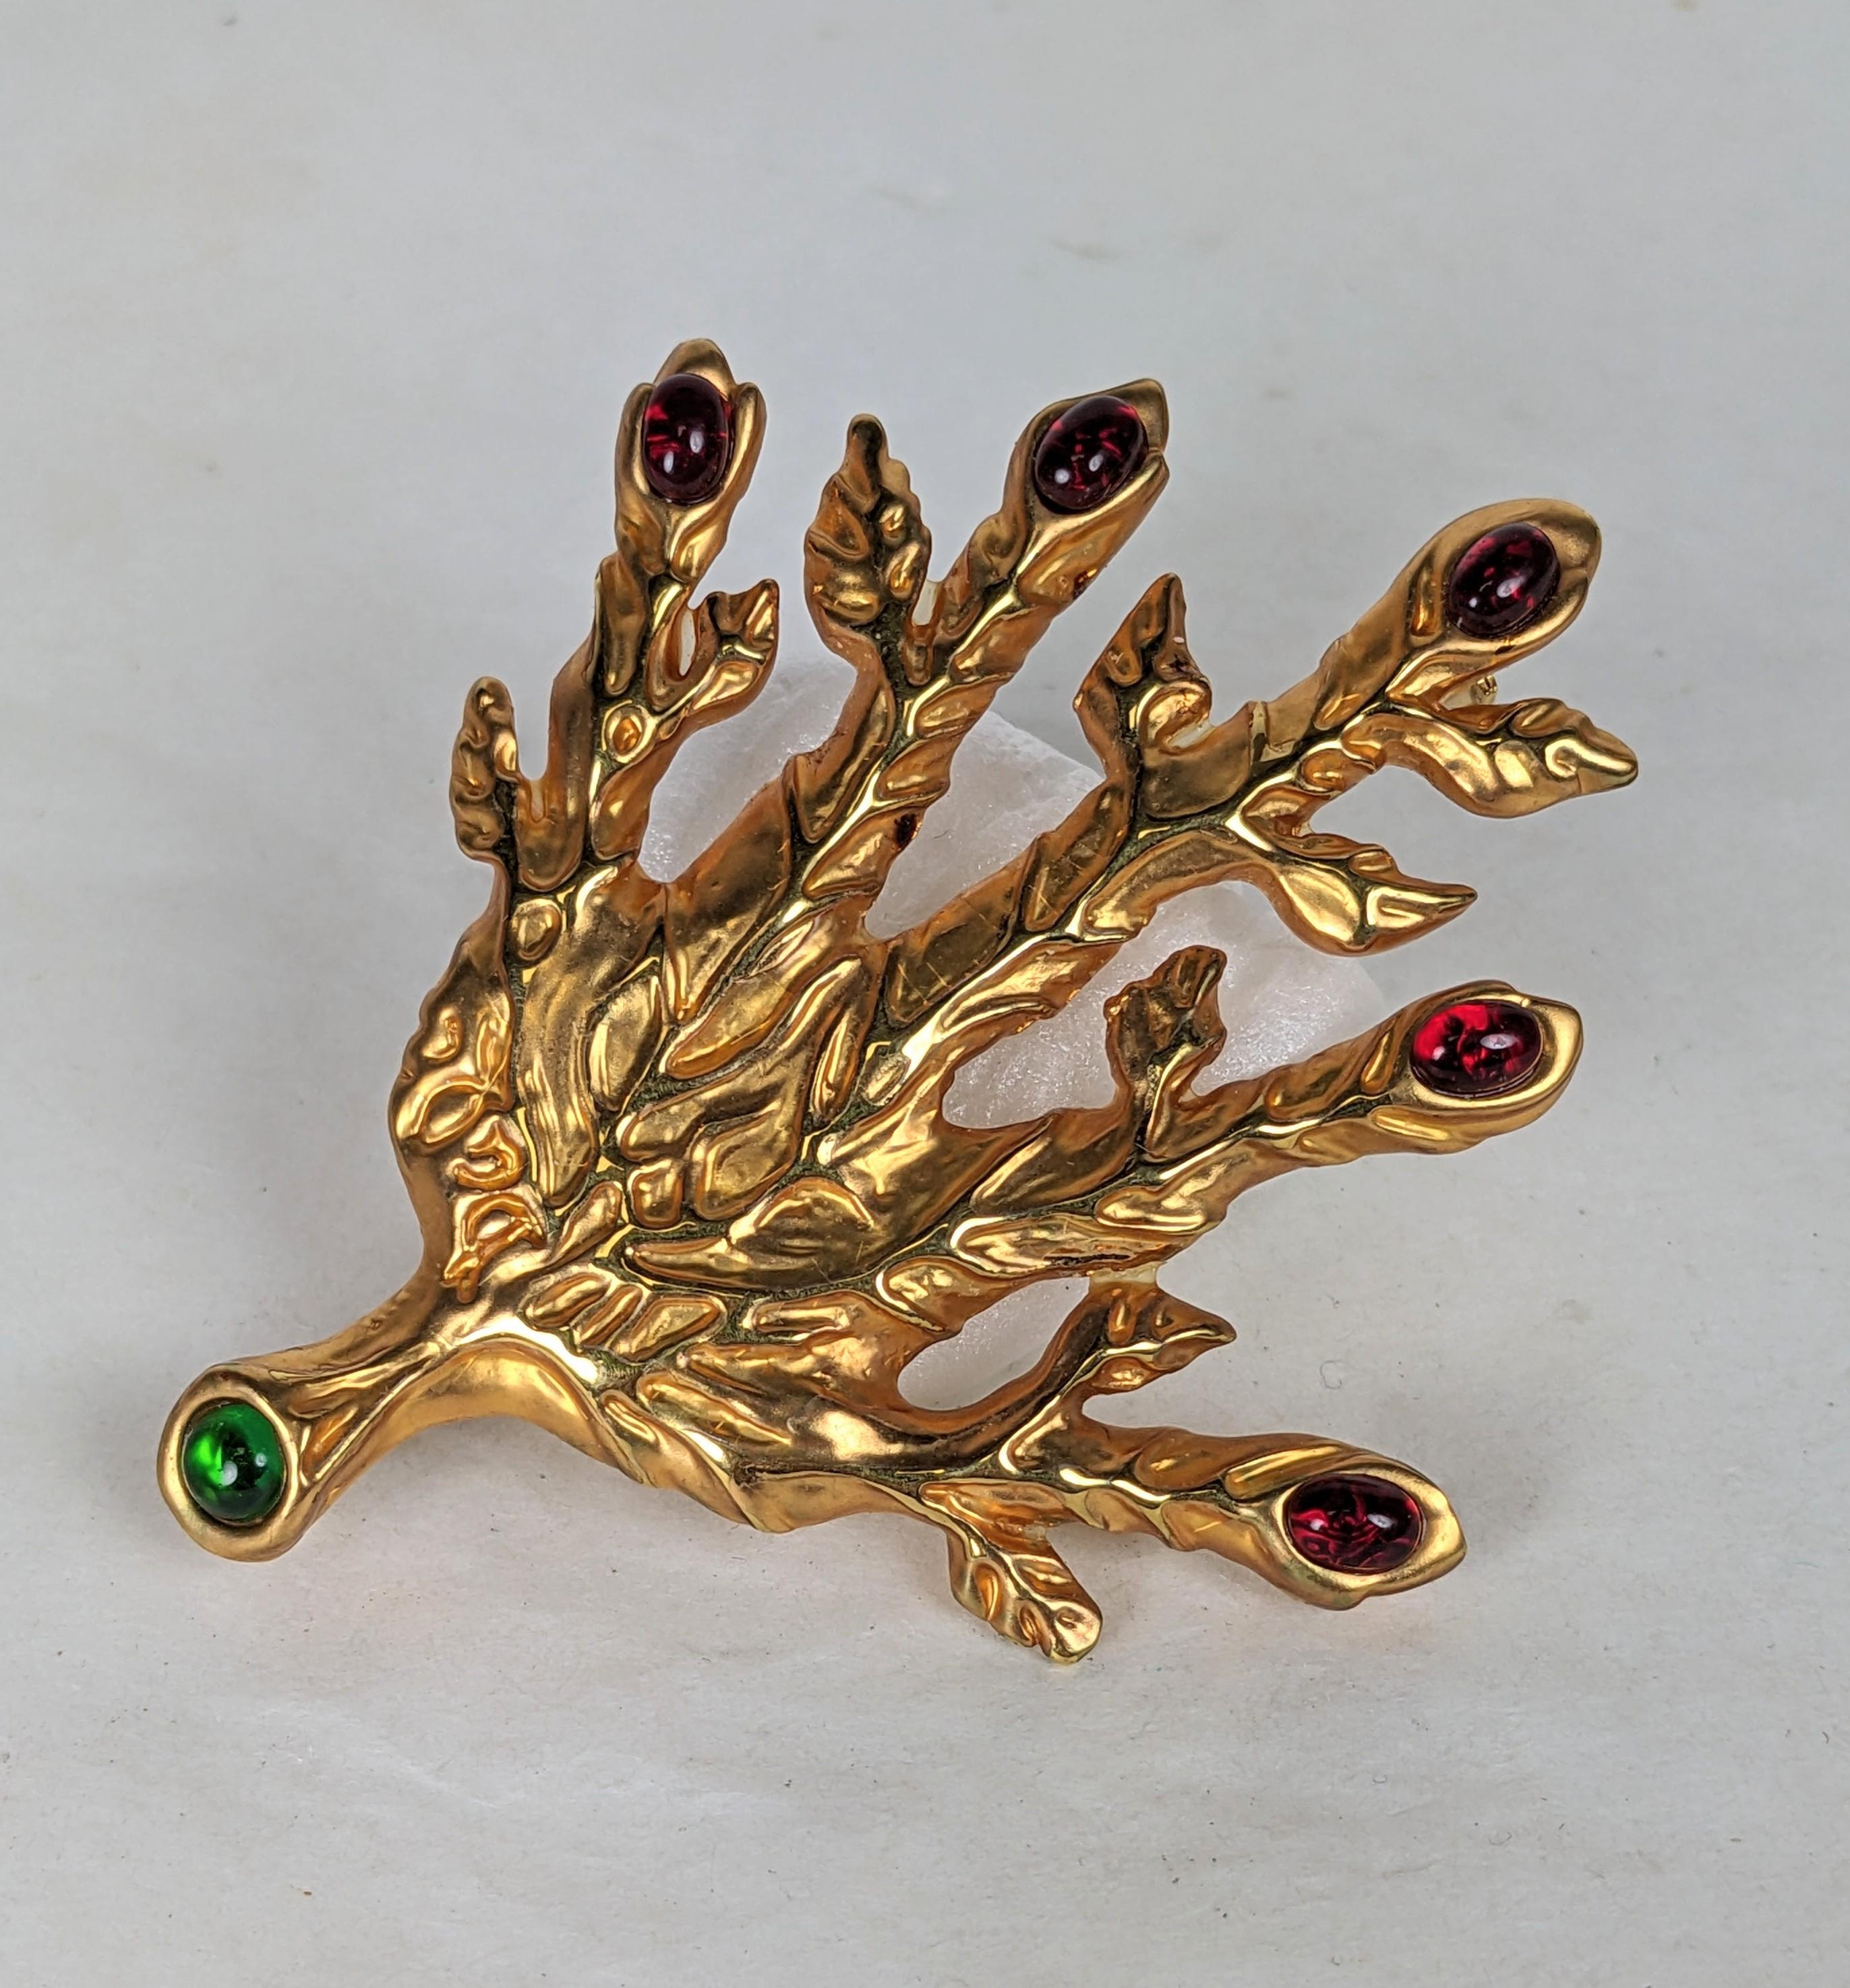 The Dali Leaf Veined Hand pendant brooch is ornamented with oval faux cabochon ruby nails and a round emerald faux cabocheon on the stem. Made of 18 karat yellow gold plate. Originally created in fine jewelry 1949, this brooch a 2001 re-edition.